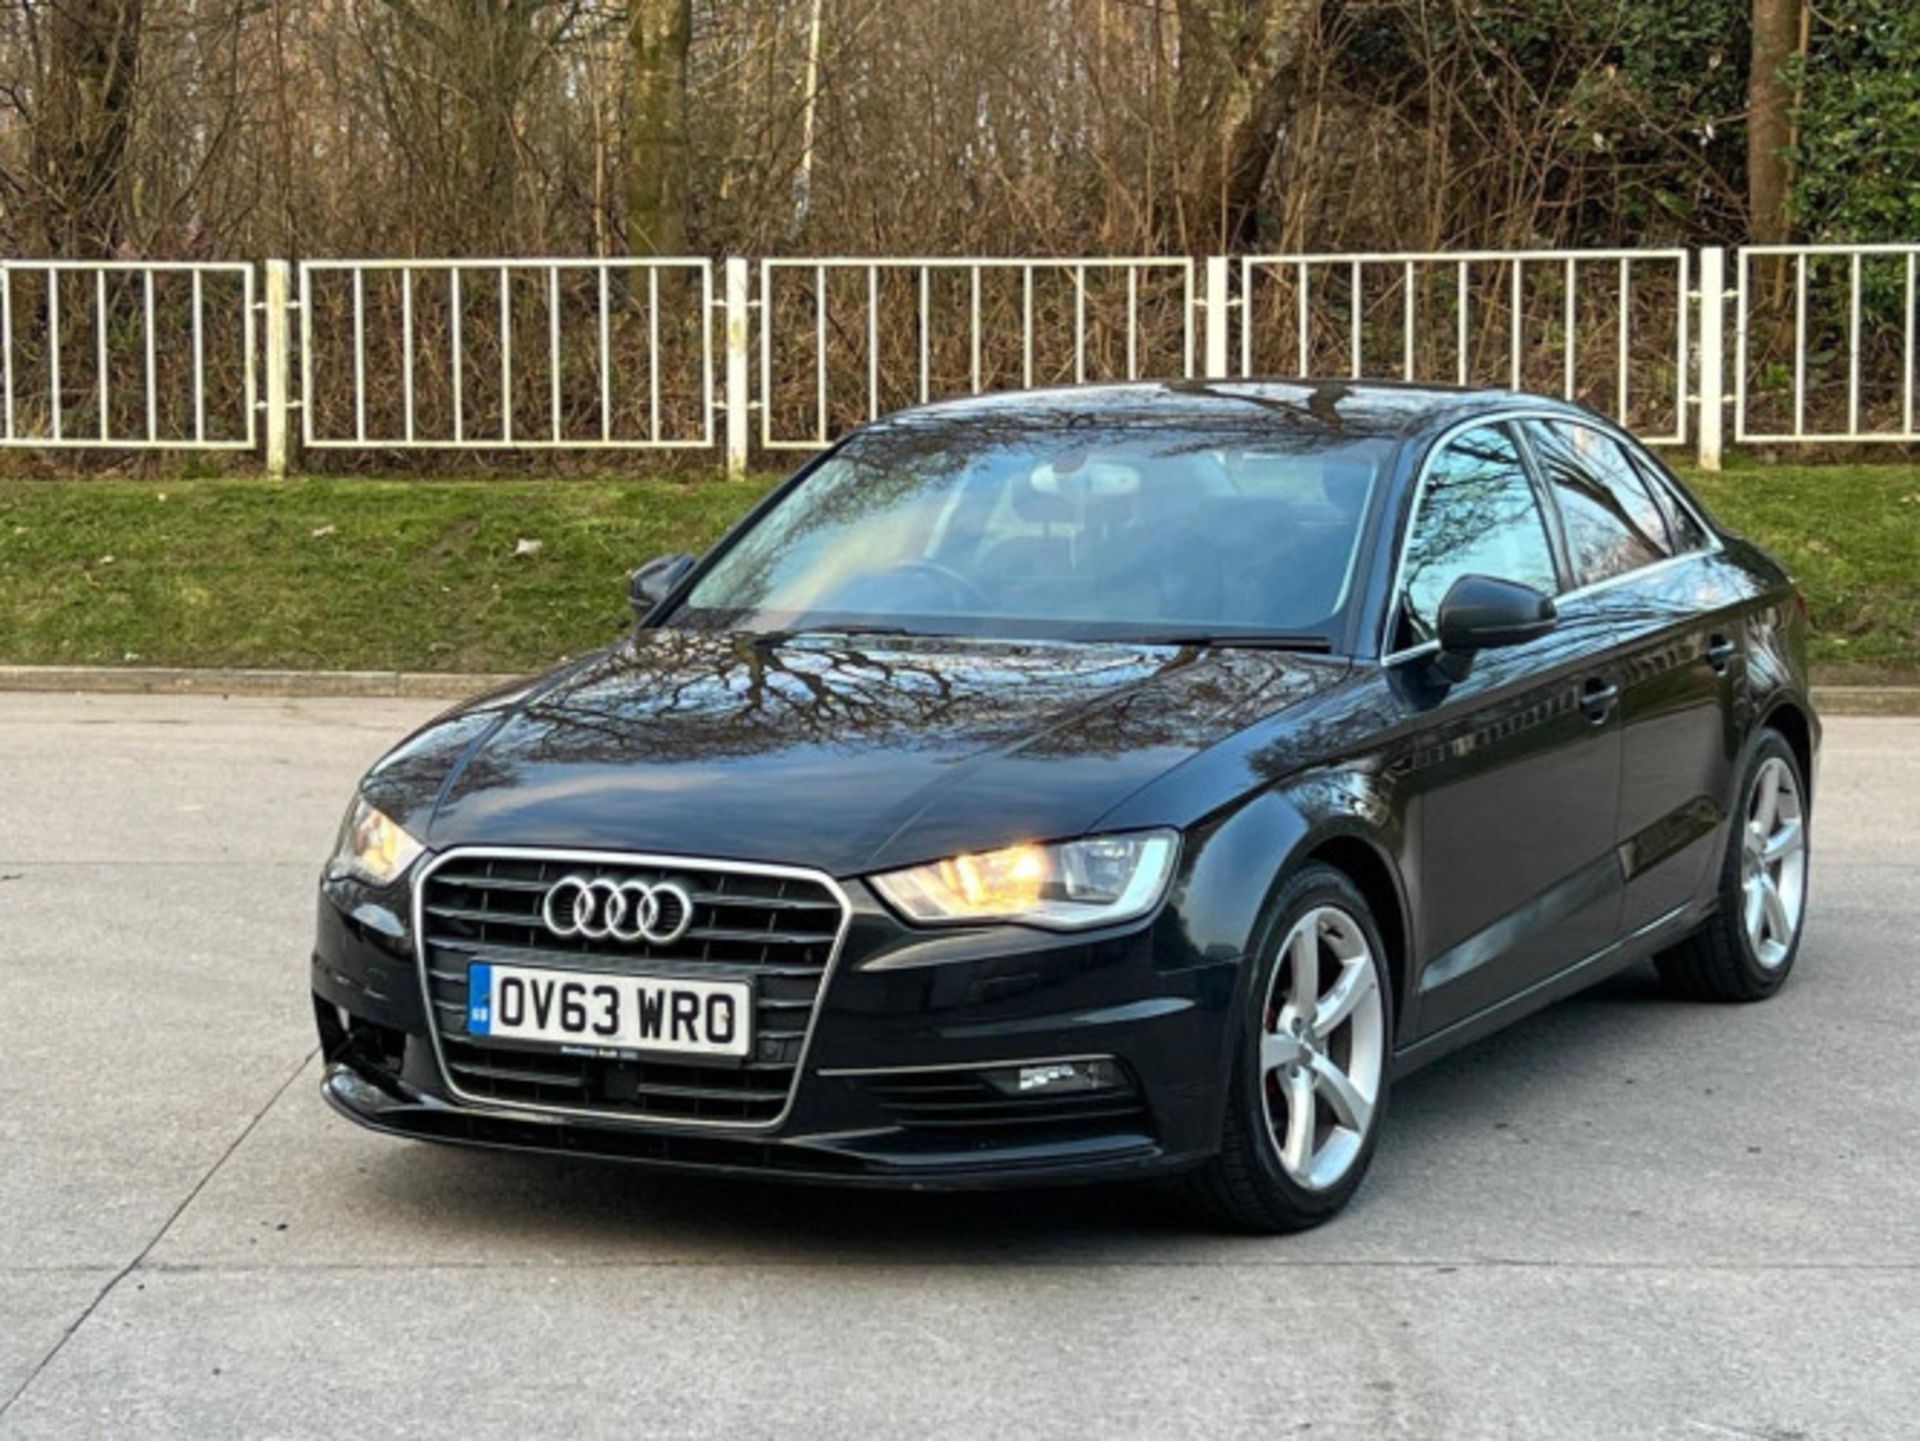 AUDI A3 2.0TDI SPORTBACK - STYLE, PERFORMANCE, AND COMFORT COMBINED >>--NO VAT ON HAMMER--<< - Image 200 of 216